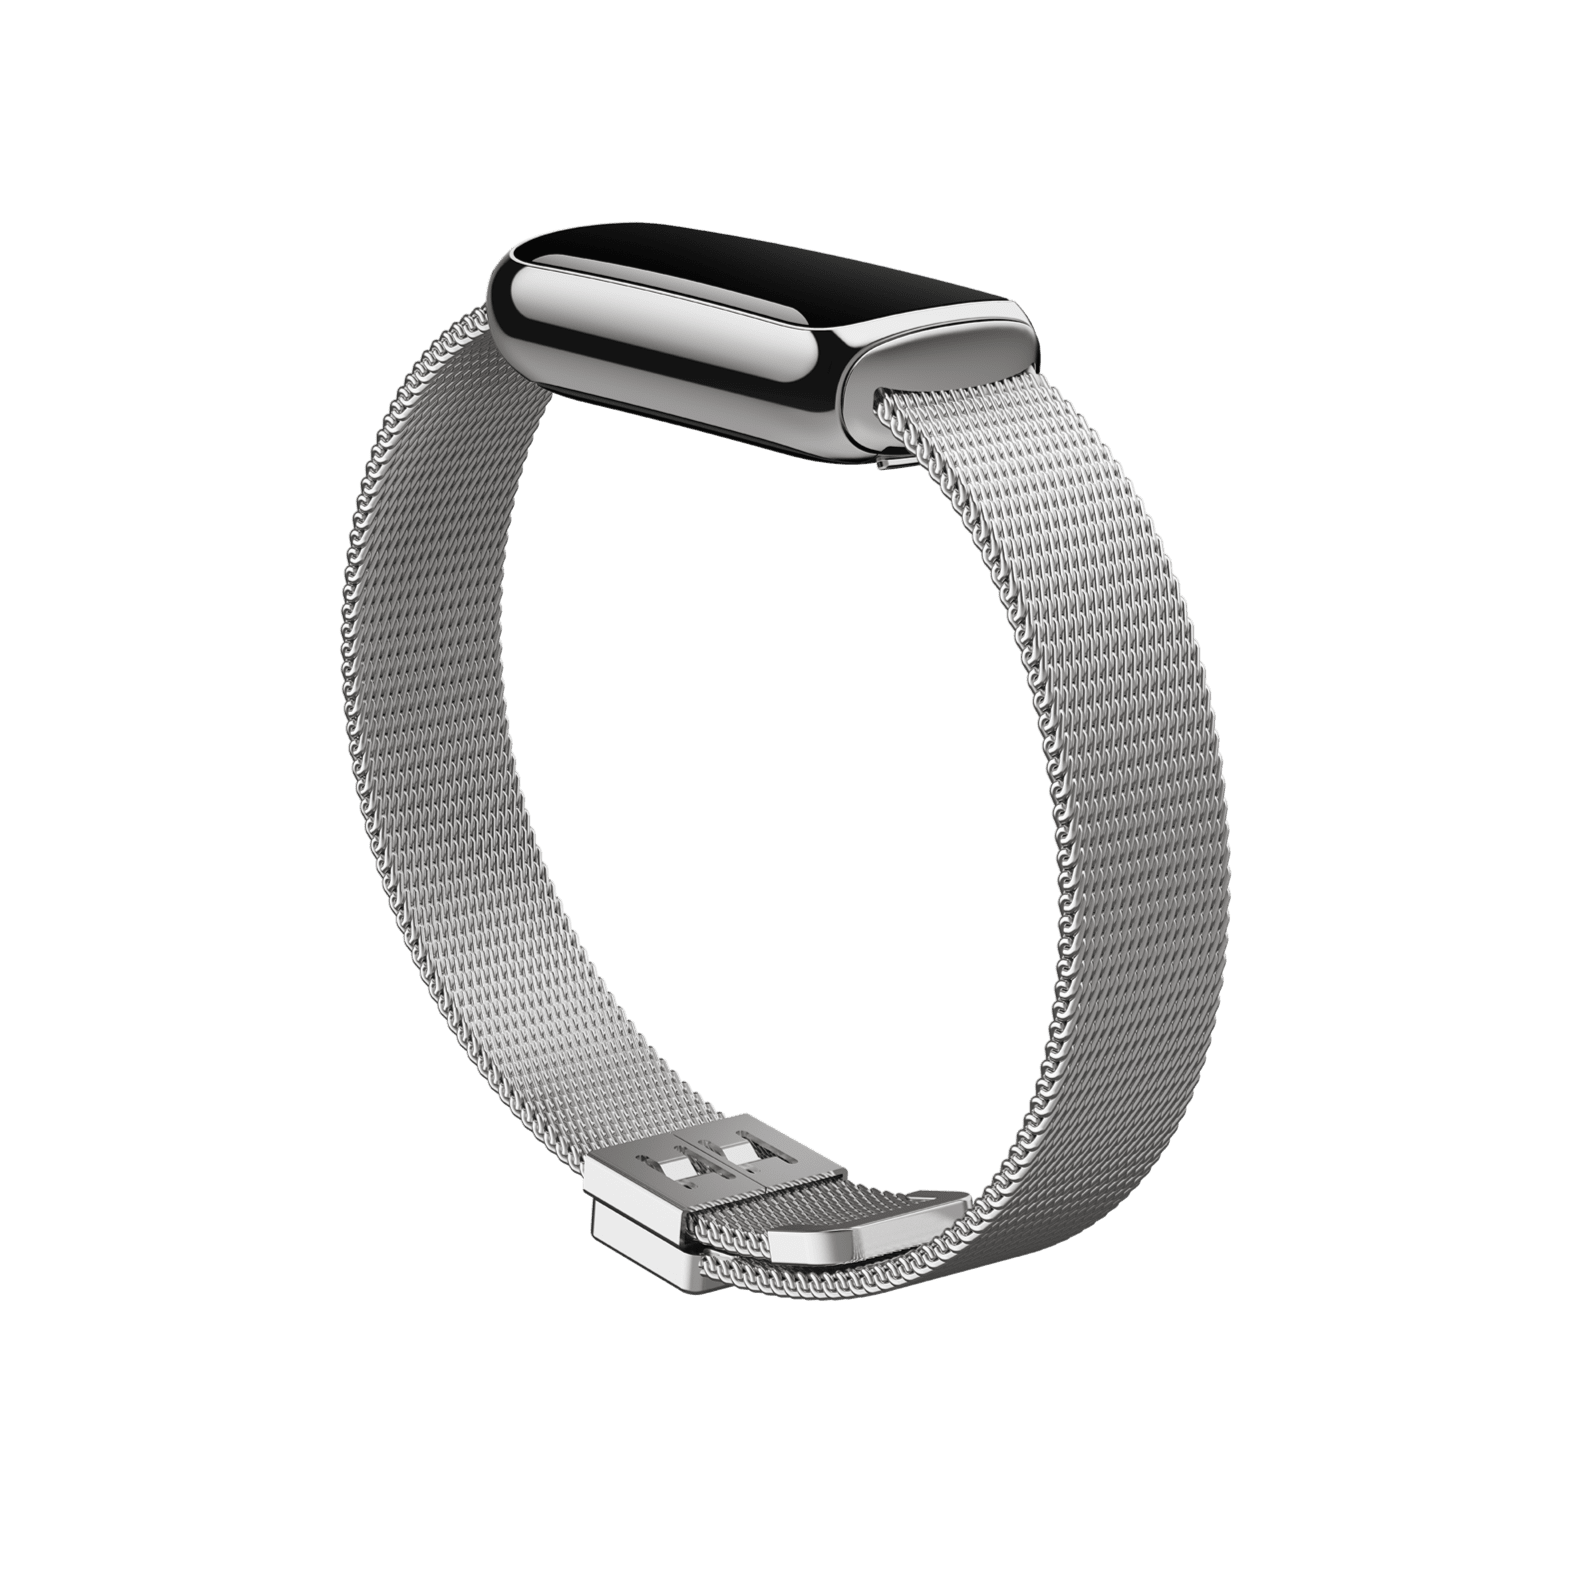 Paleis Zijdelings waterstof Stainless Steel Mesh Accessory Bands | Shop Fitbit Luxe Accessories